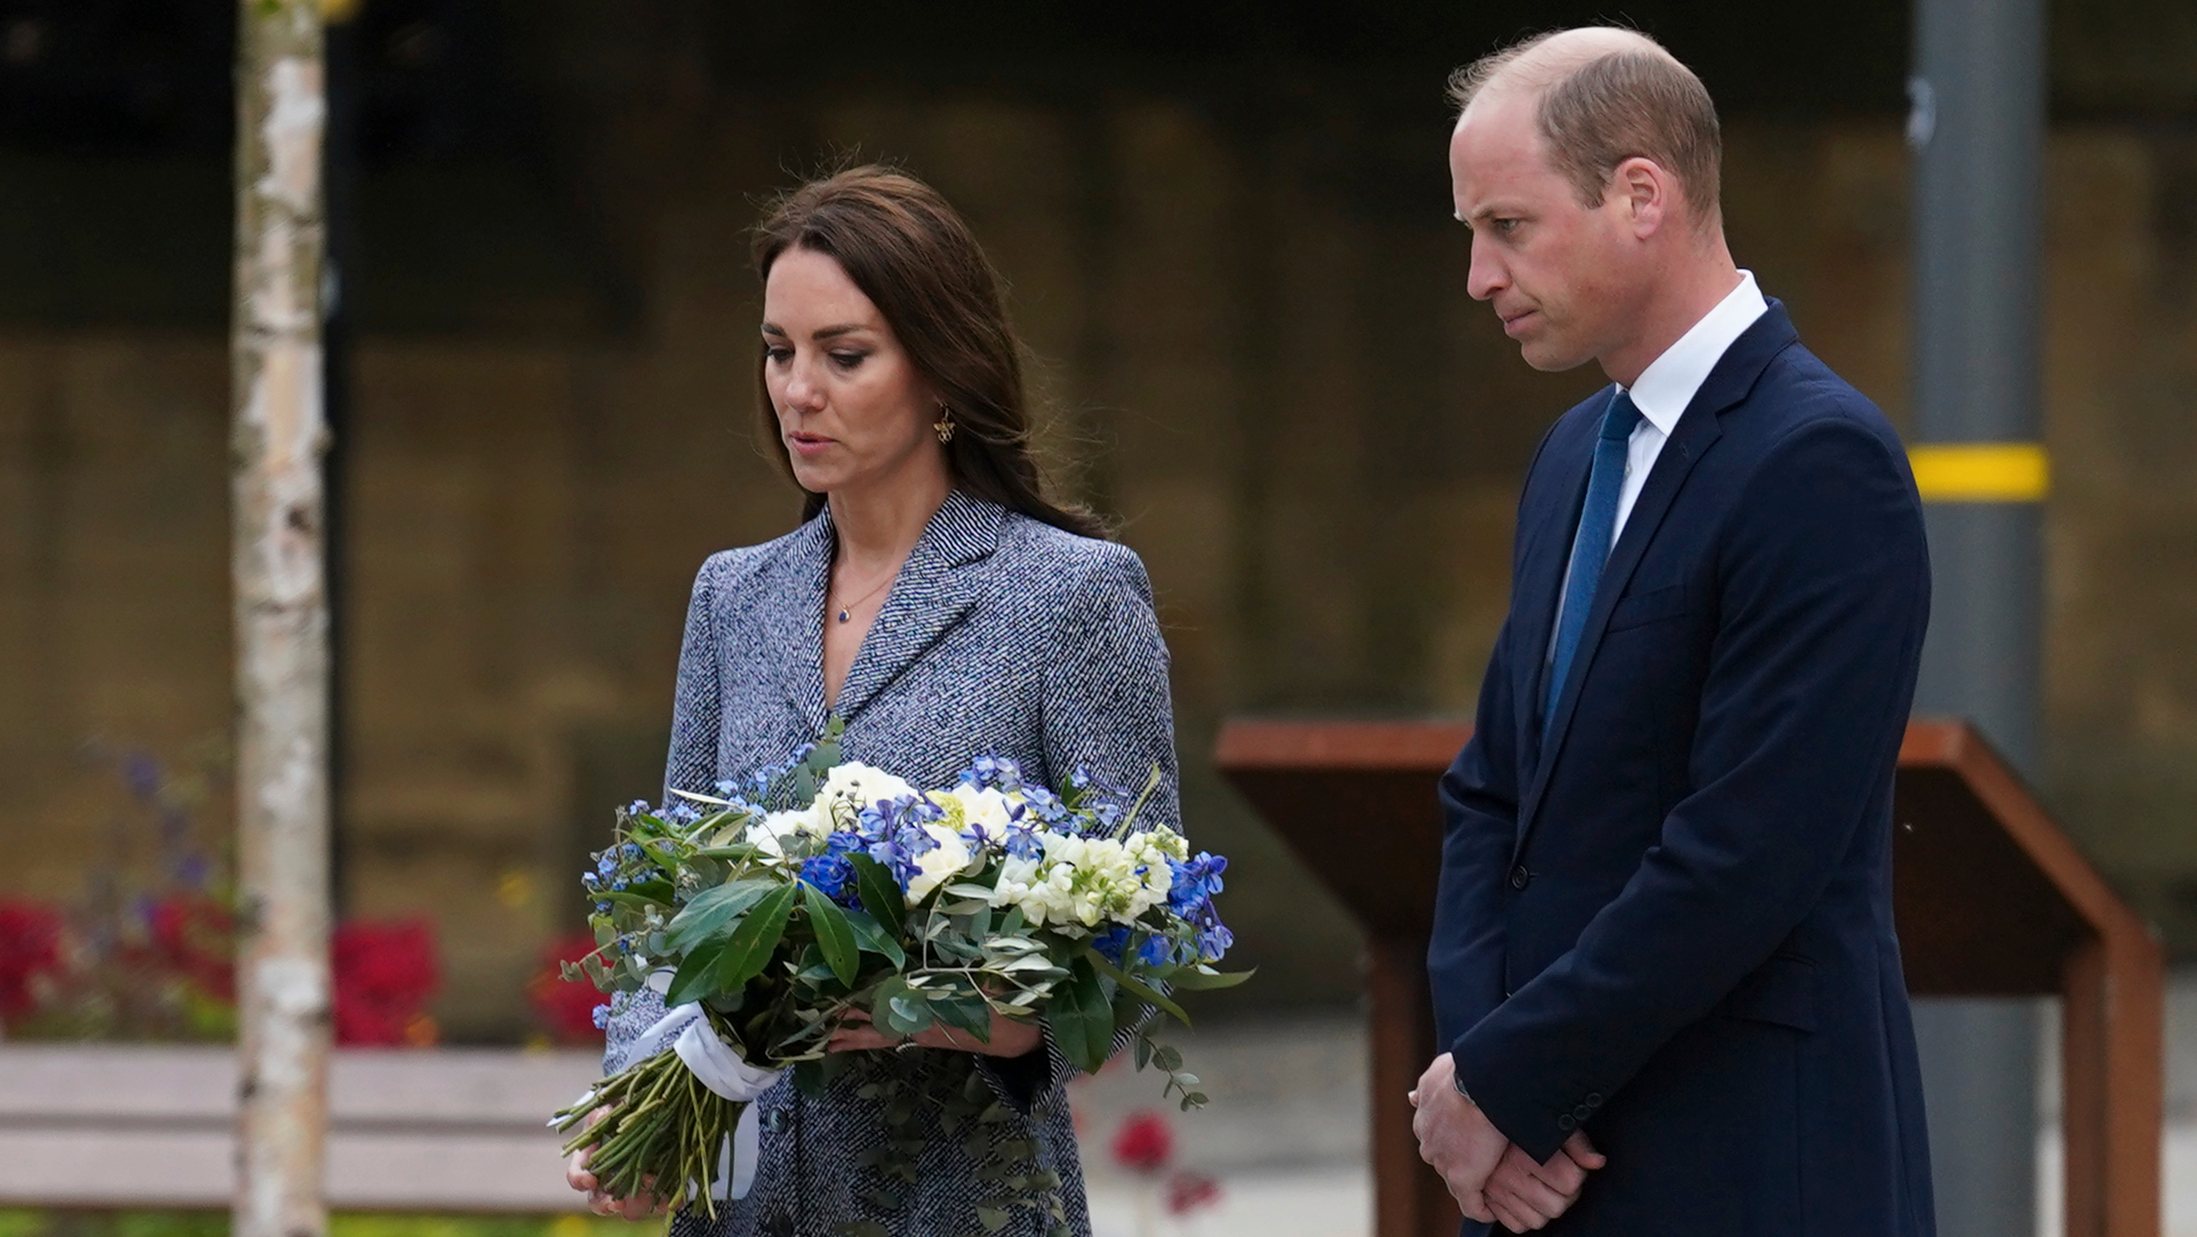 The Duke And Duchess Of Cambridge Attend The Official Opening Of The Glade Of Light Memorial